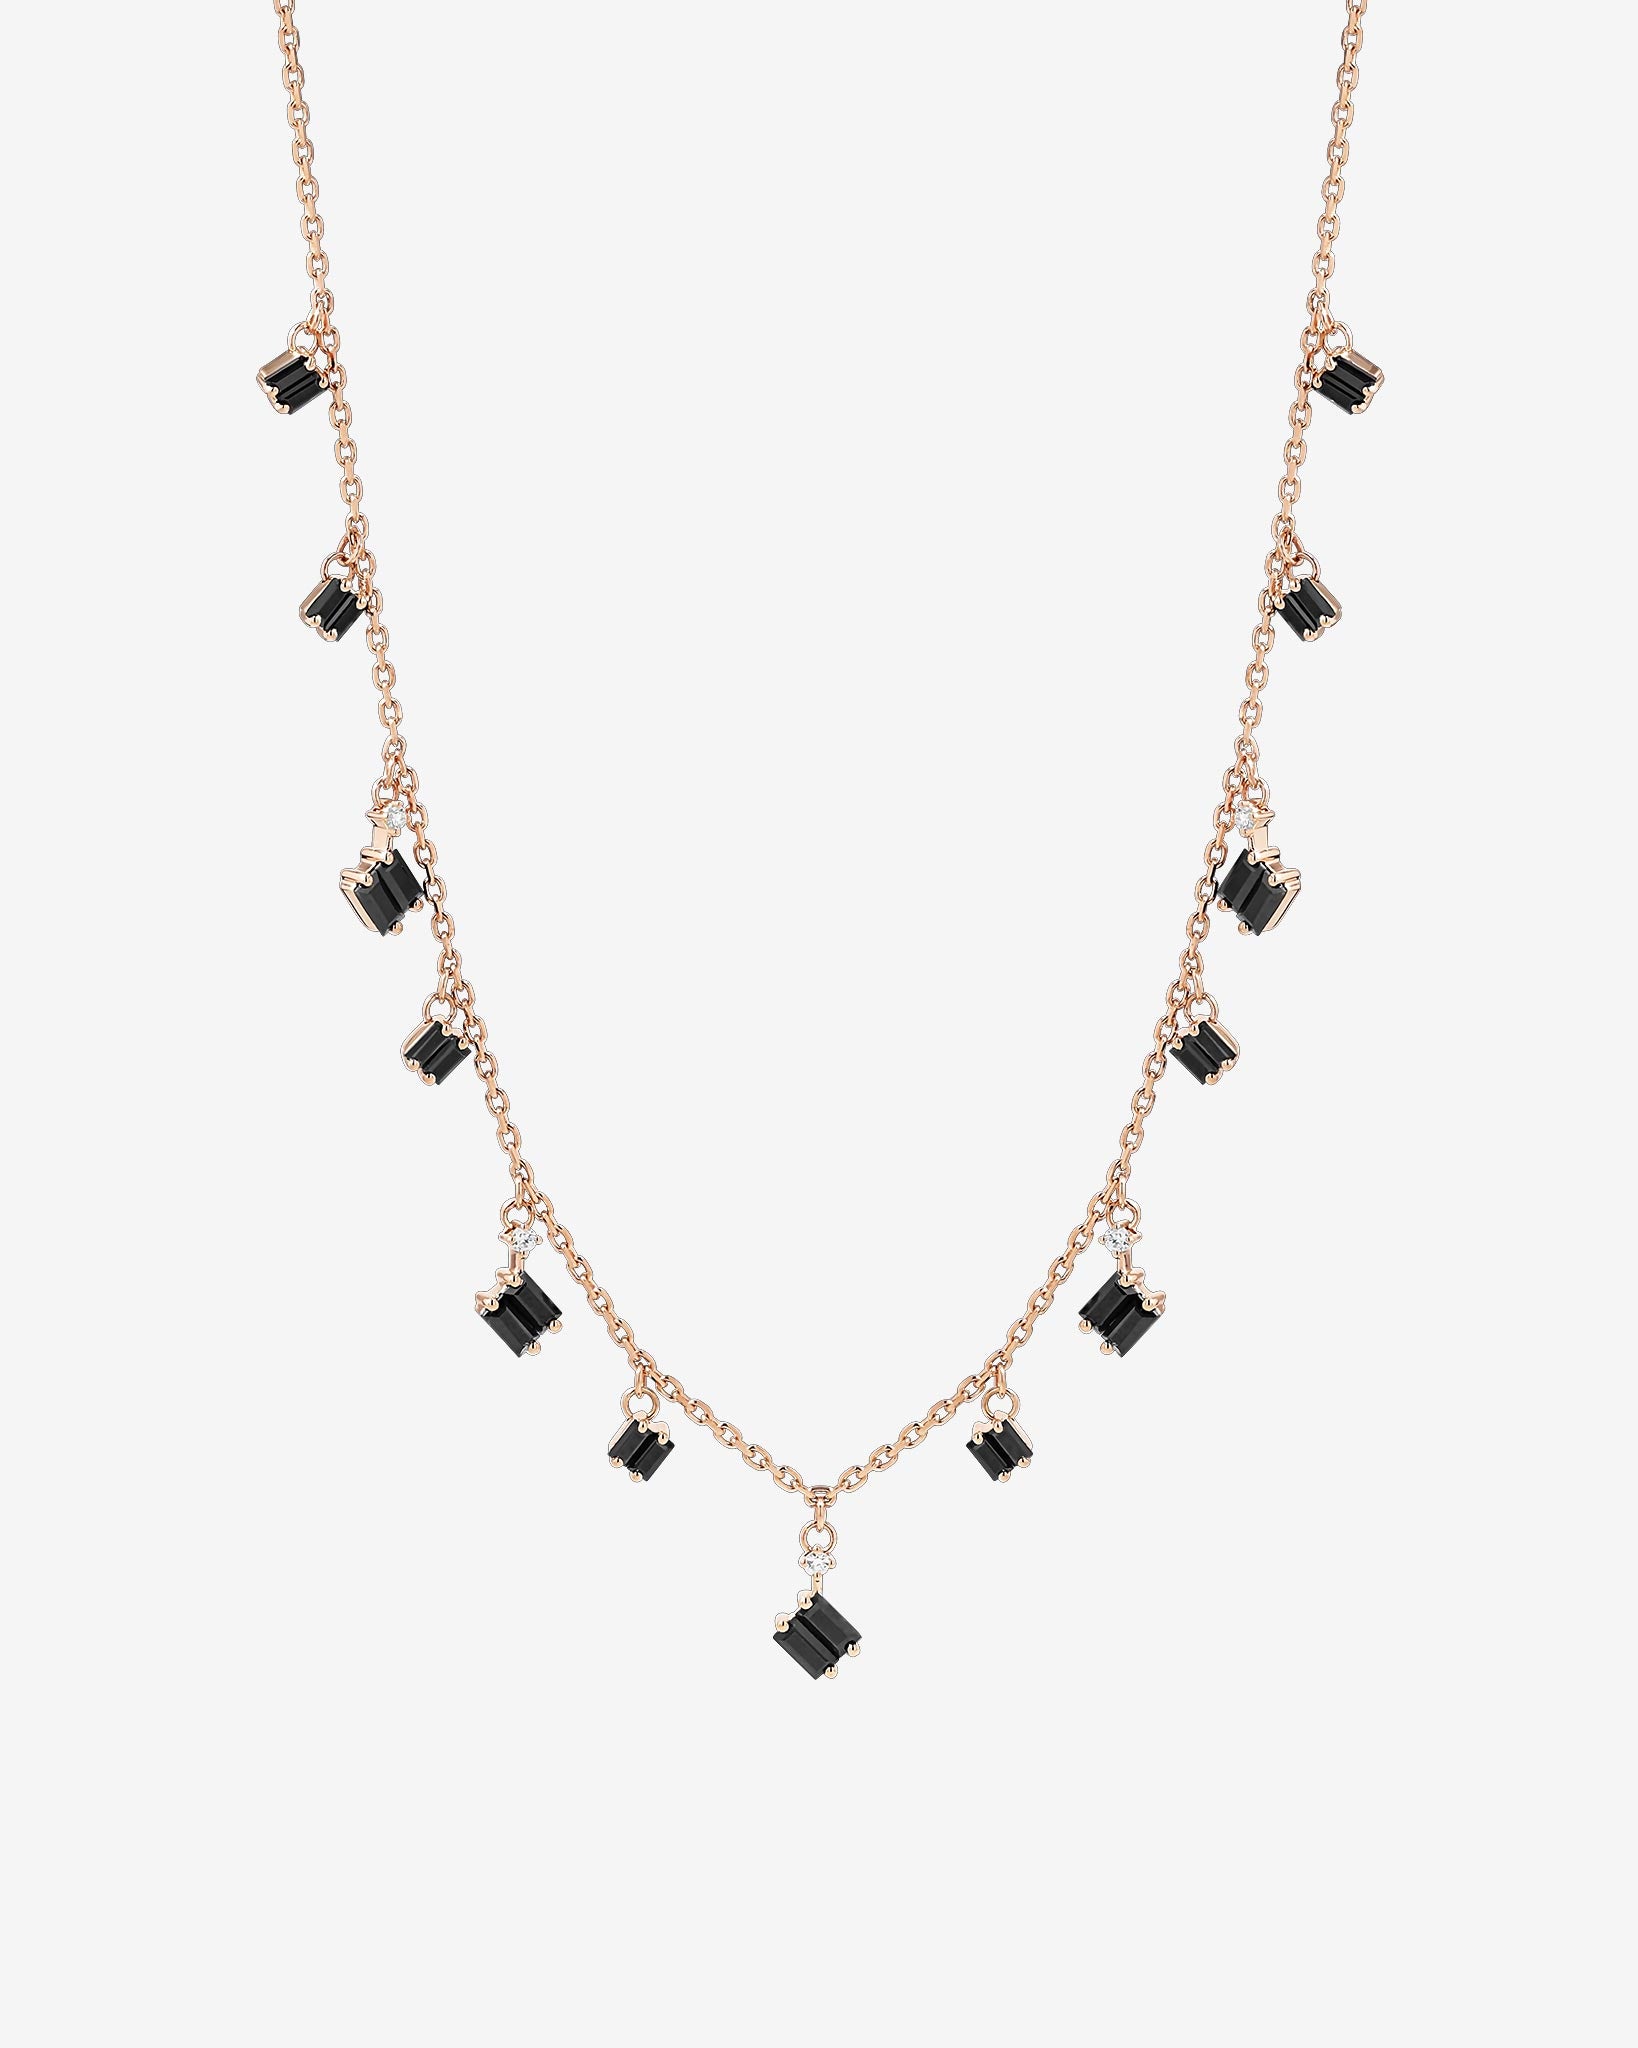 Suzanne Kalan Black Sapphire Cascade Necklace in 18k rose gold